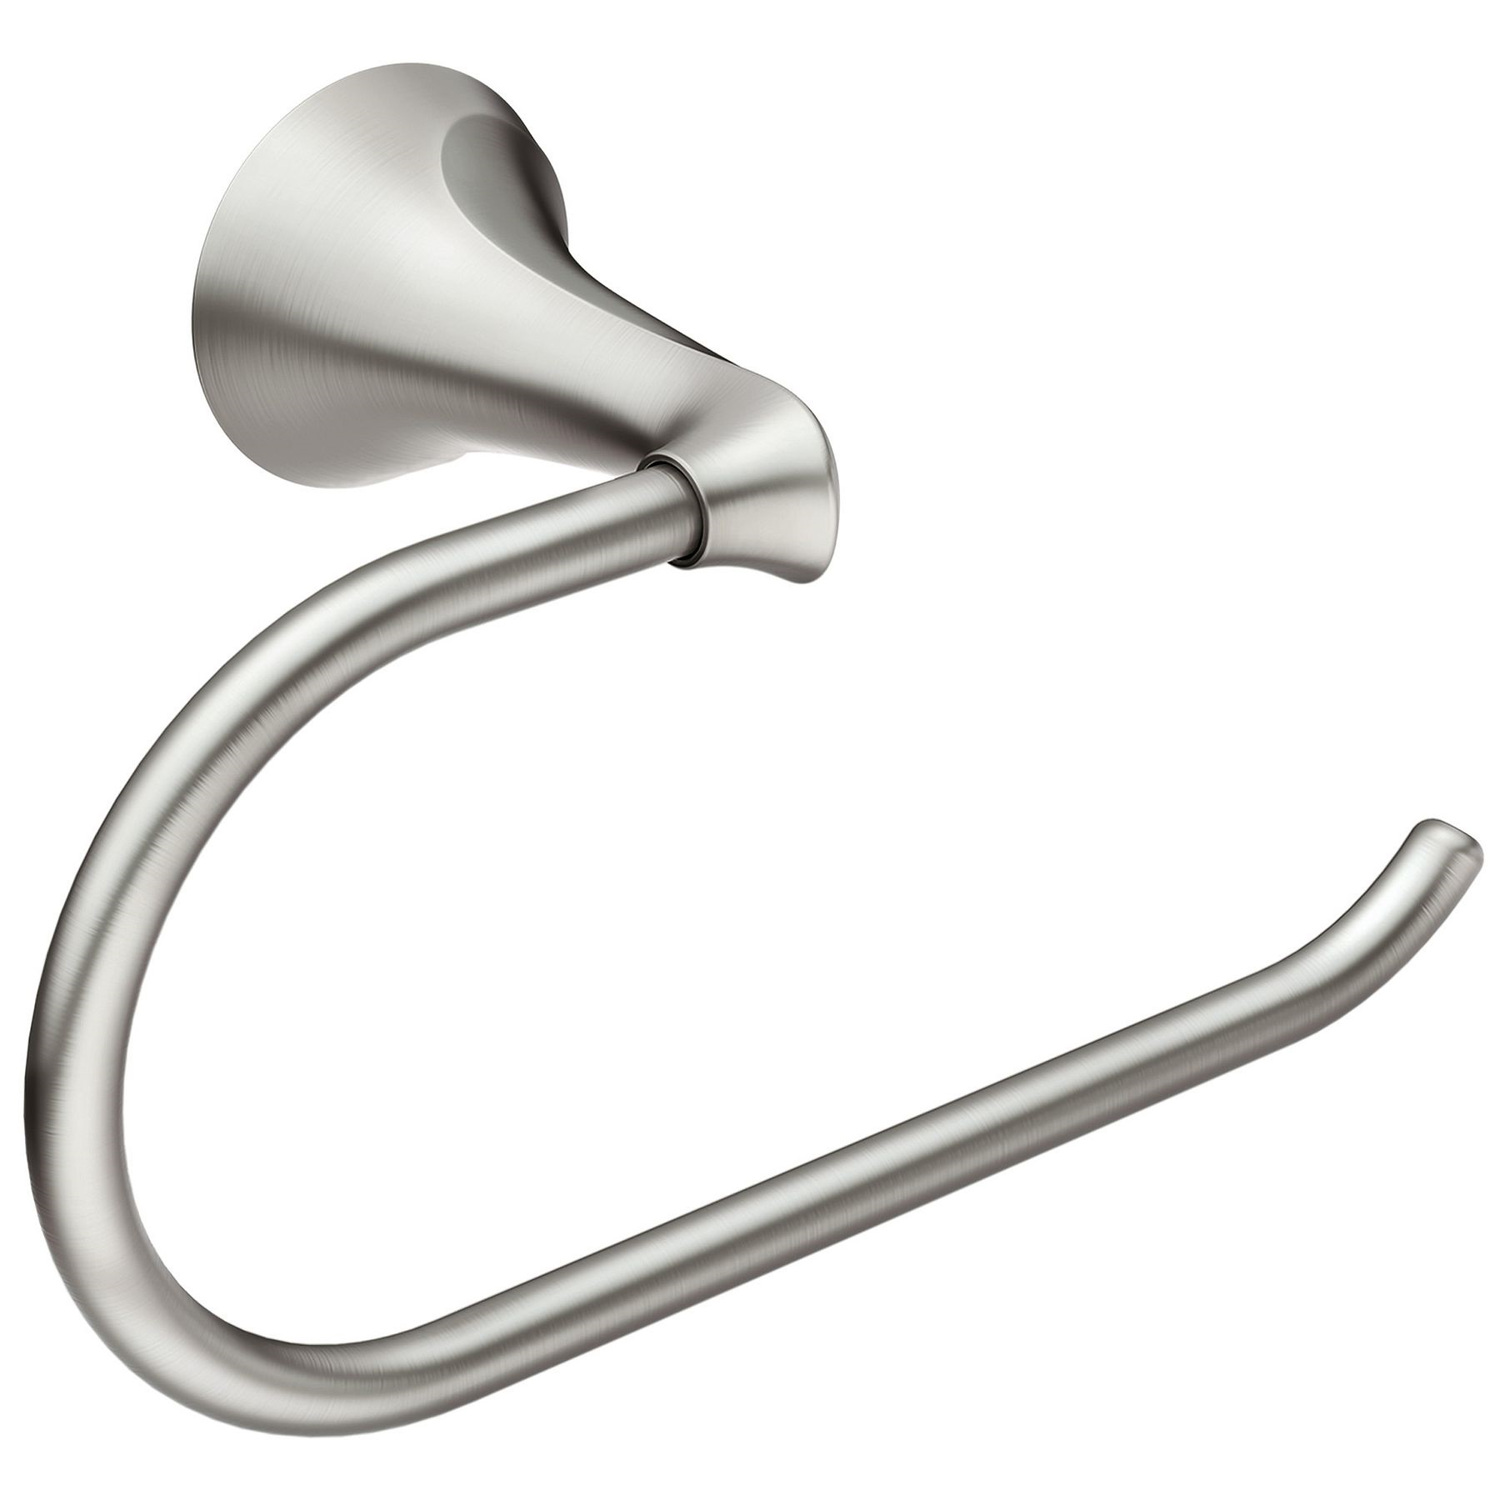 Photos - Other interior and decor Moen Darcy Brushed Nickel Toilet Paper Holder MY1509BN 